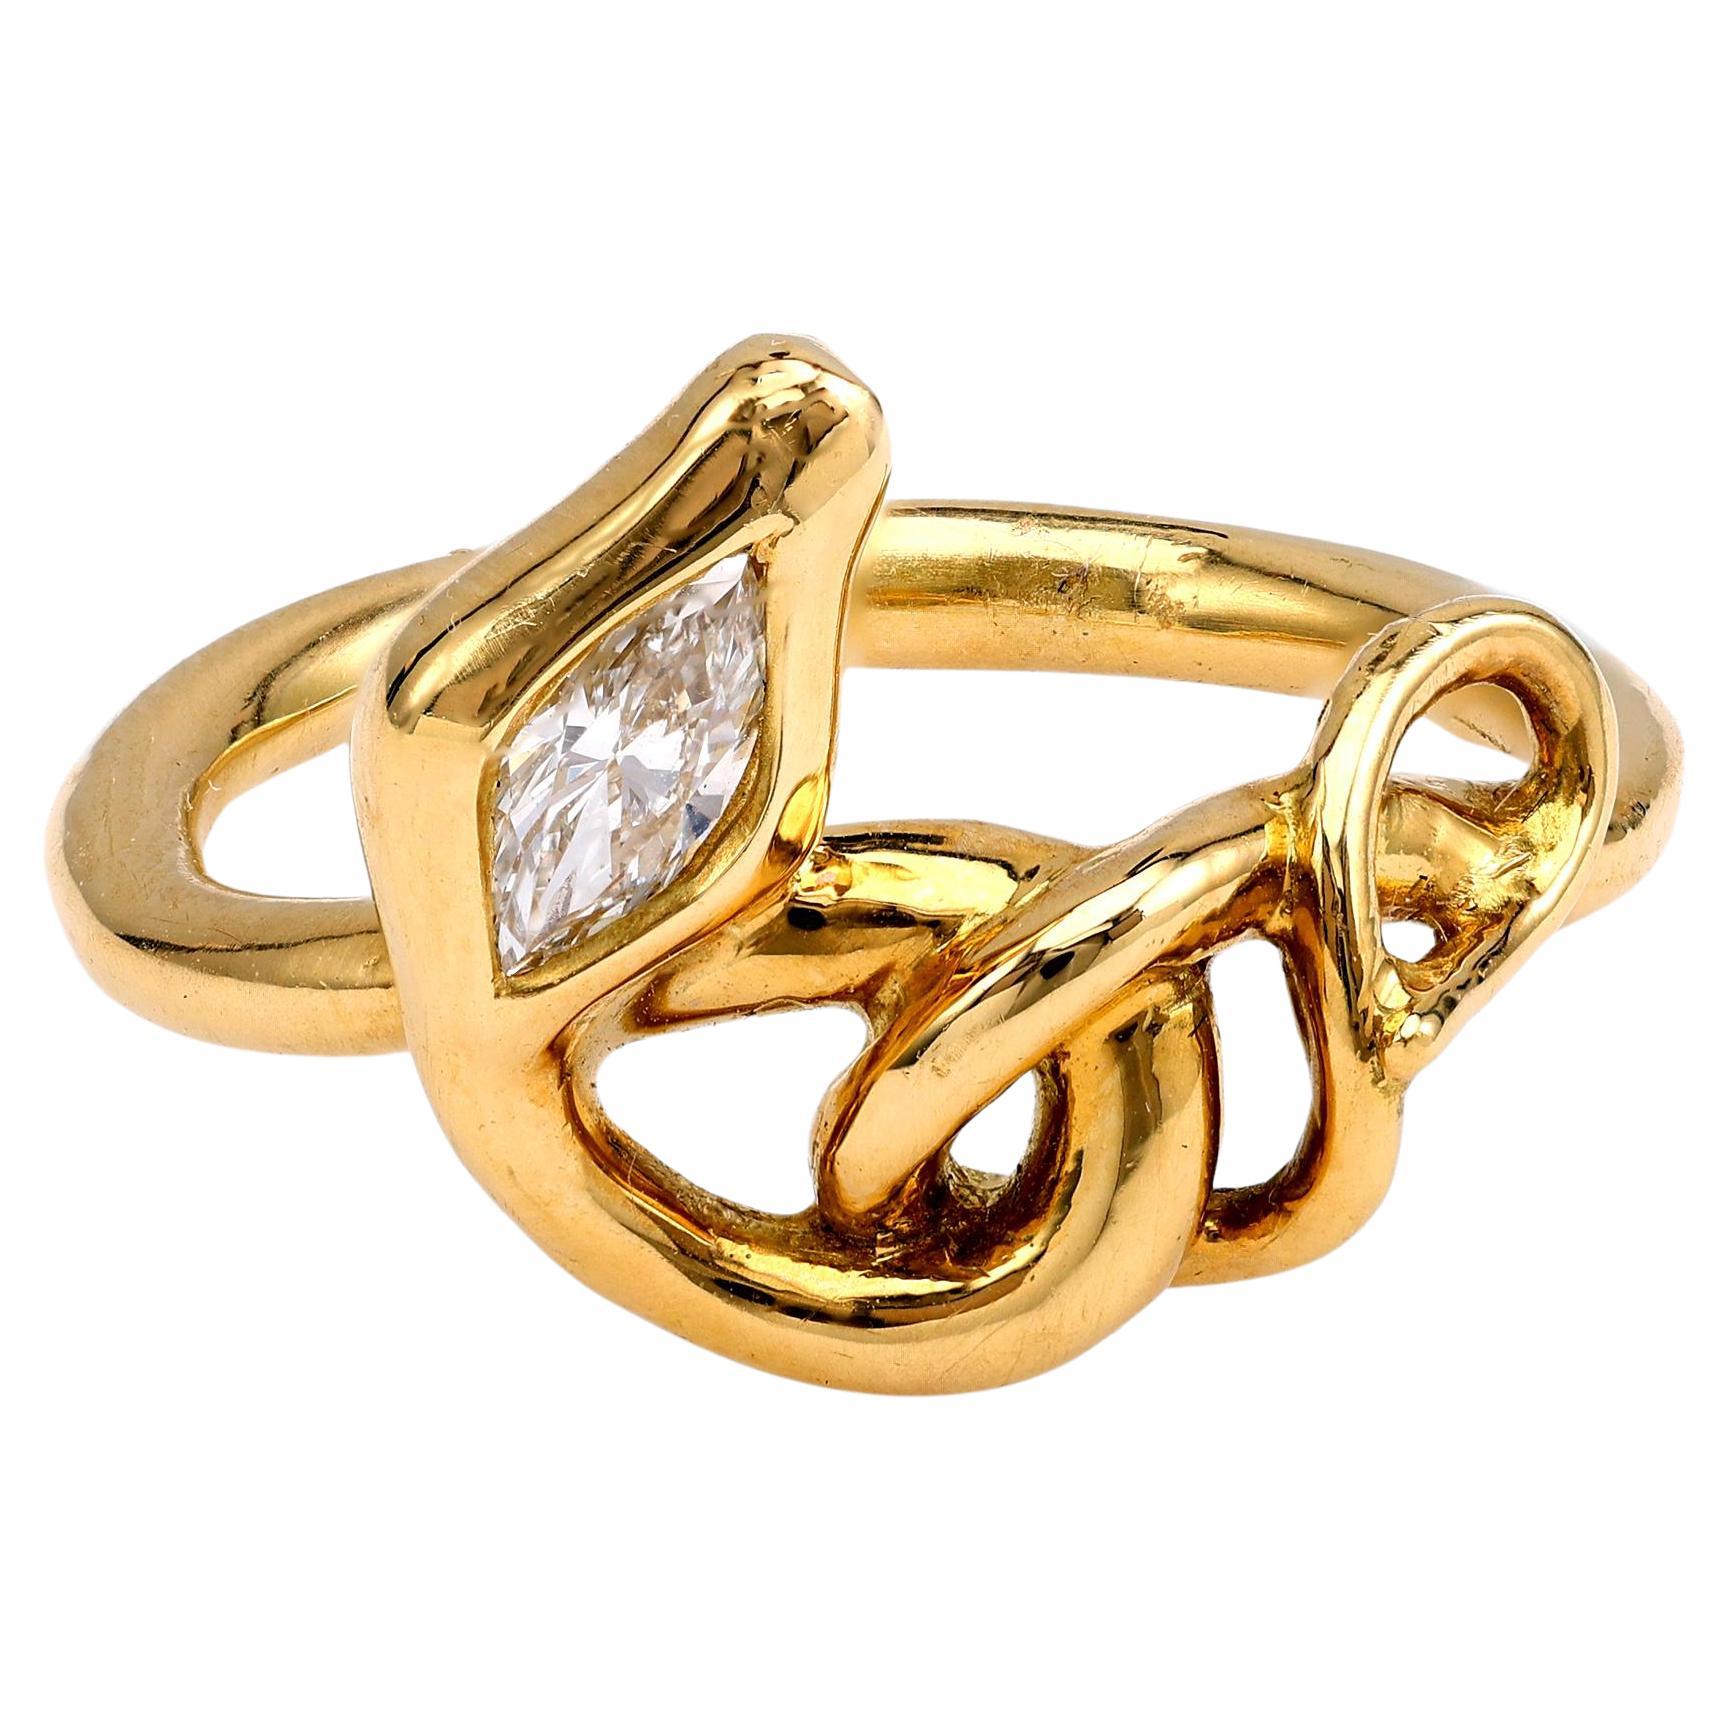 18k Gold Snake Ring with Marquise Diamond